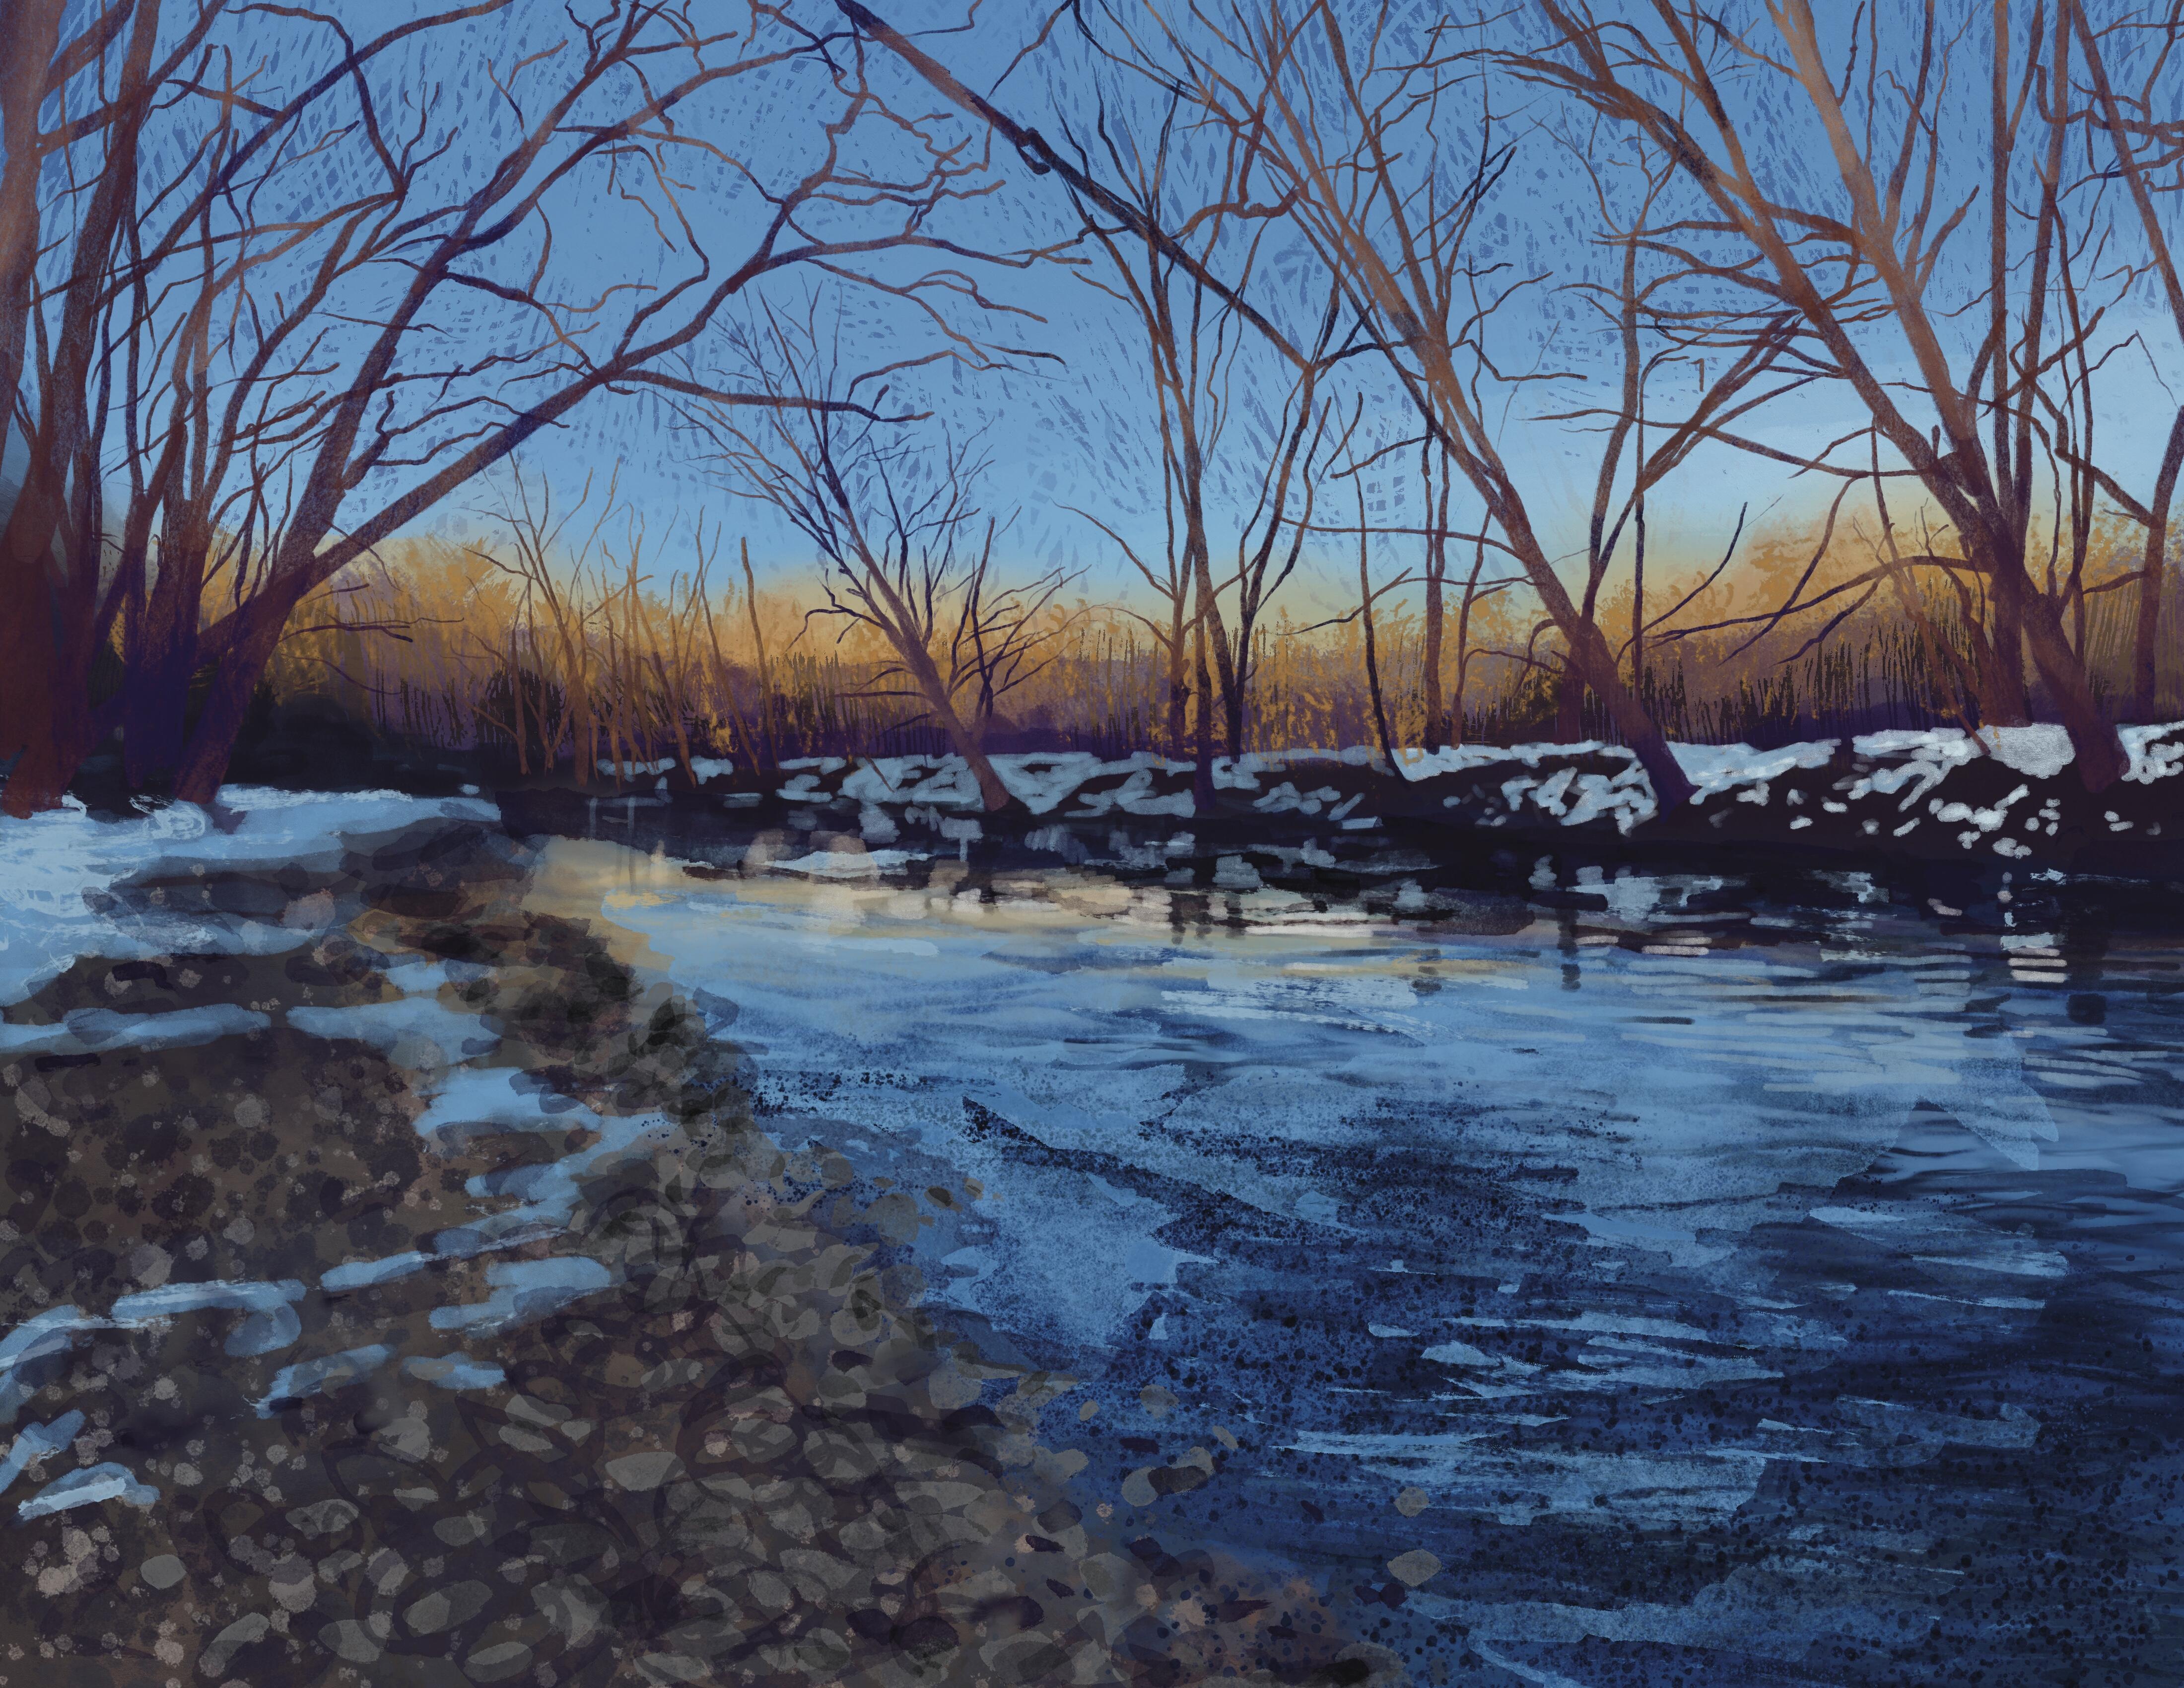 A digital painting of a river at the Bent of the River Audubon Center, at dusk.